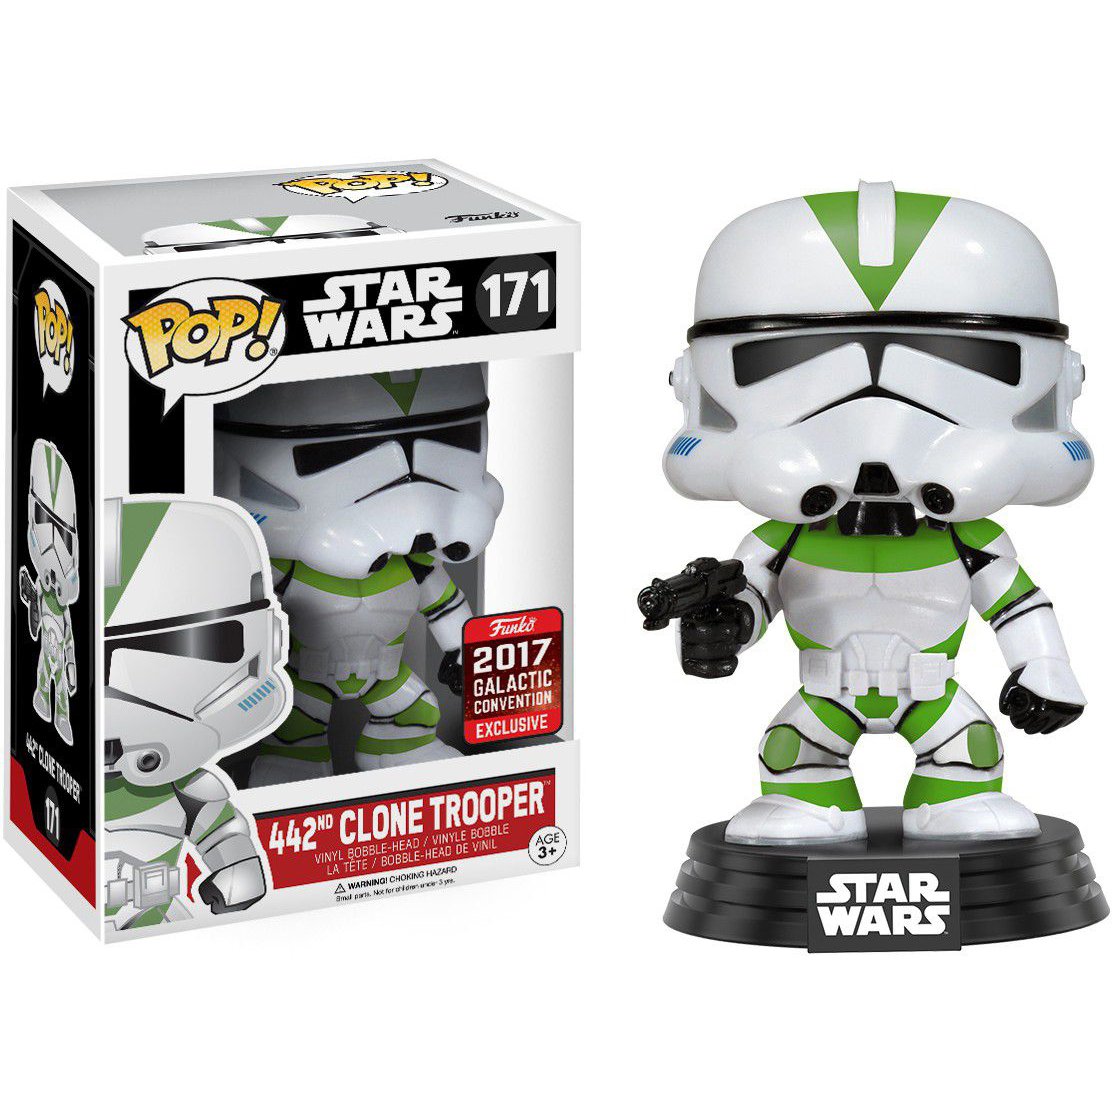 Funko Pop! Star Wars - 442nd Clone Trooper - 171 - 2017 Galactic Convention